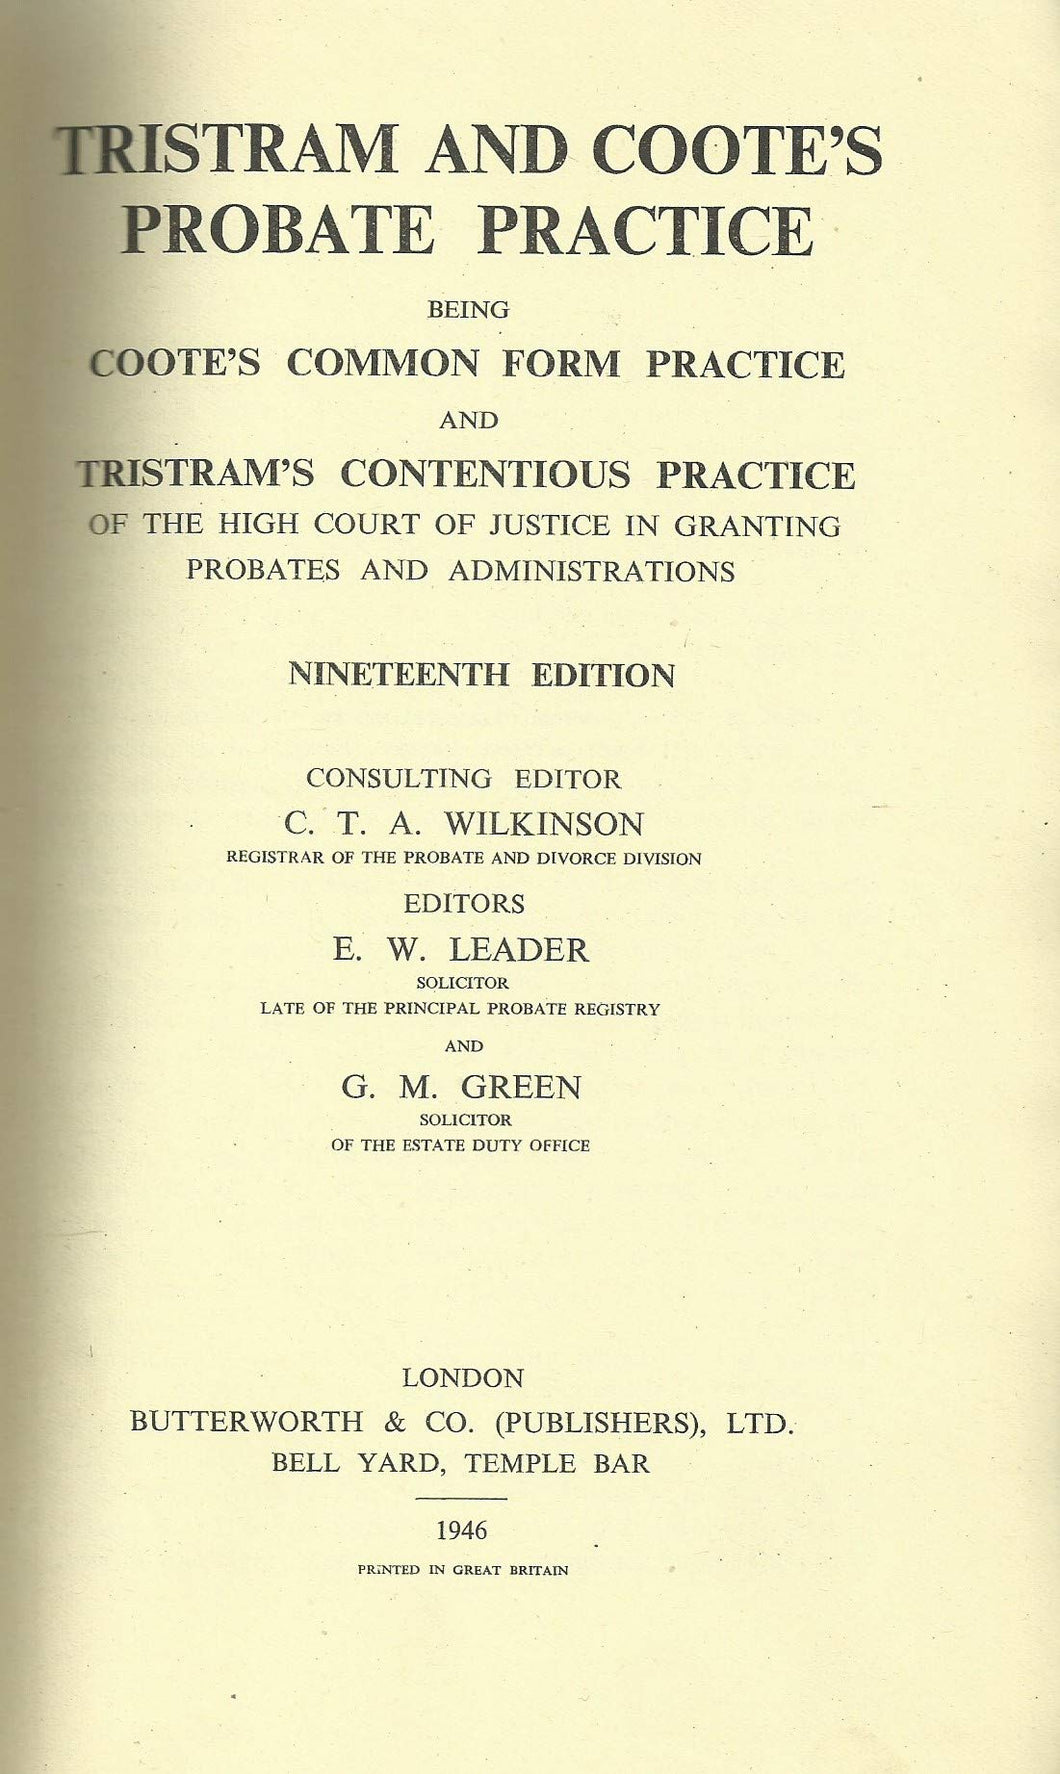 Tristram and Coote's Probate Practice - Nineteenth Edition (19th Edition)